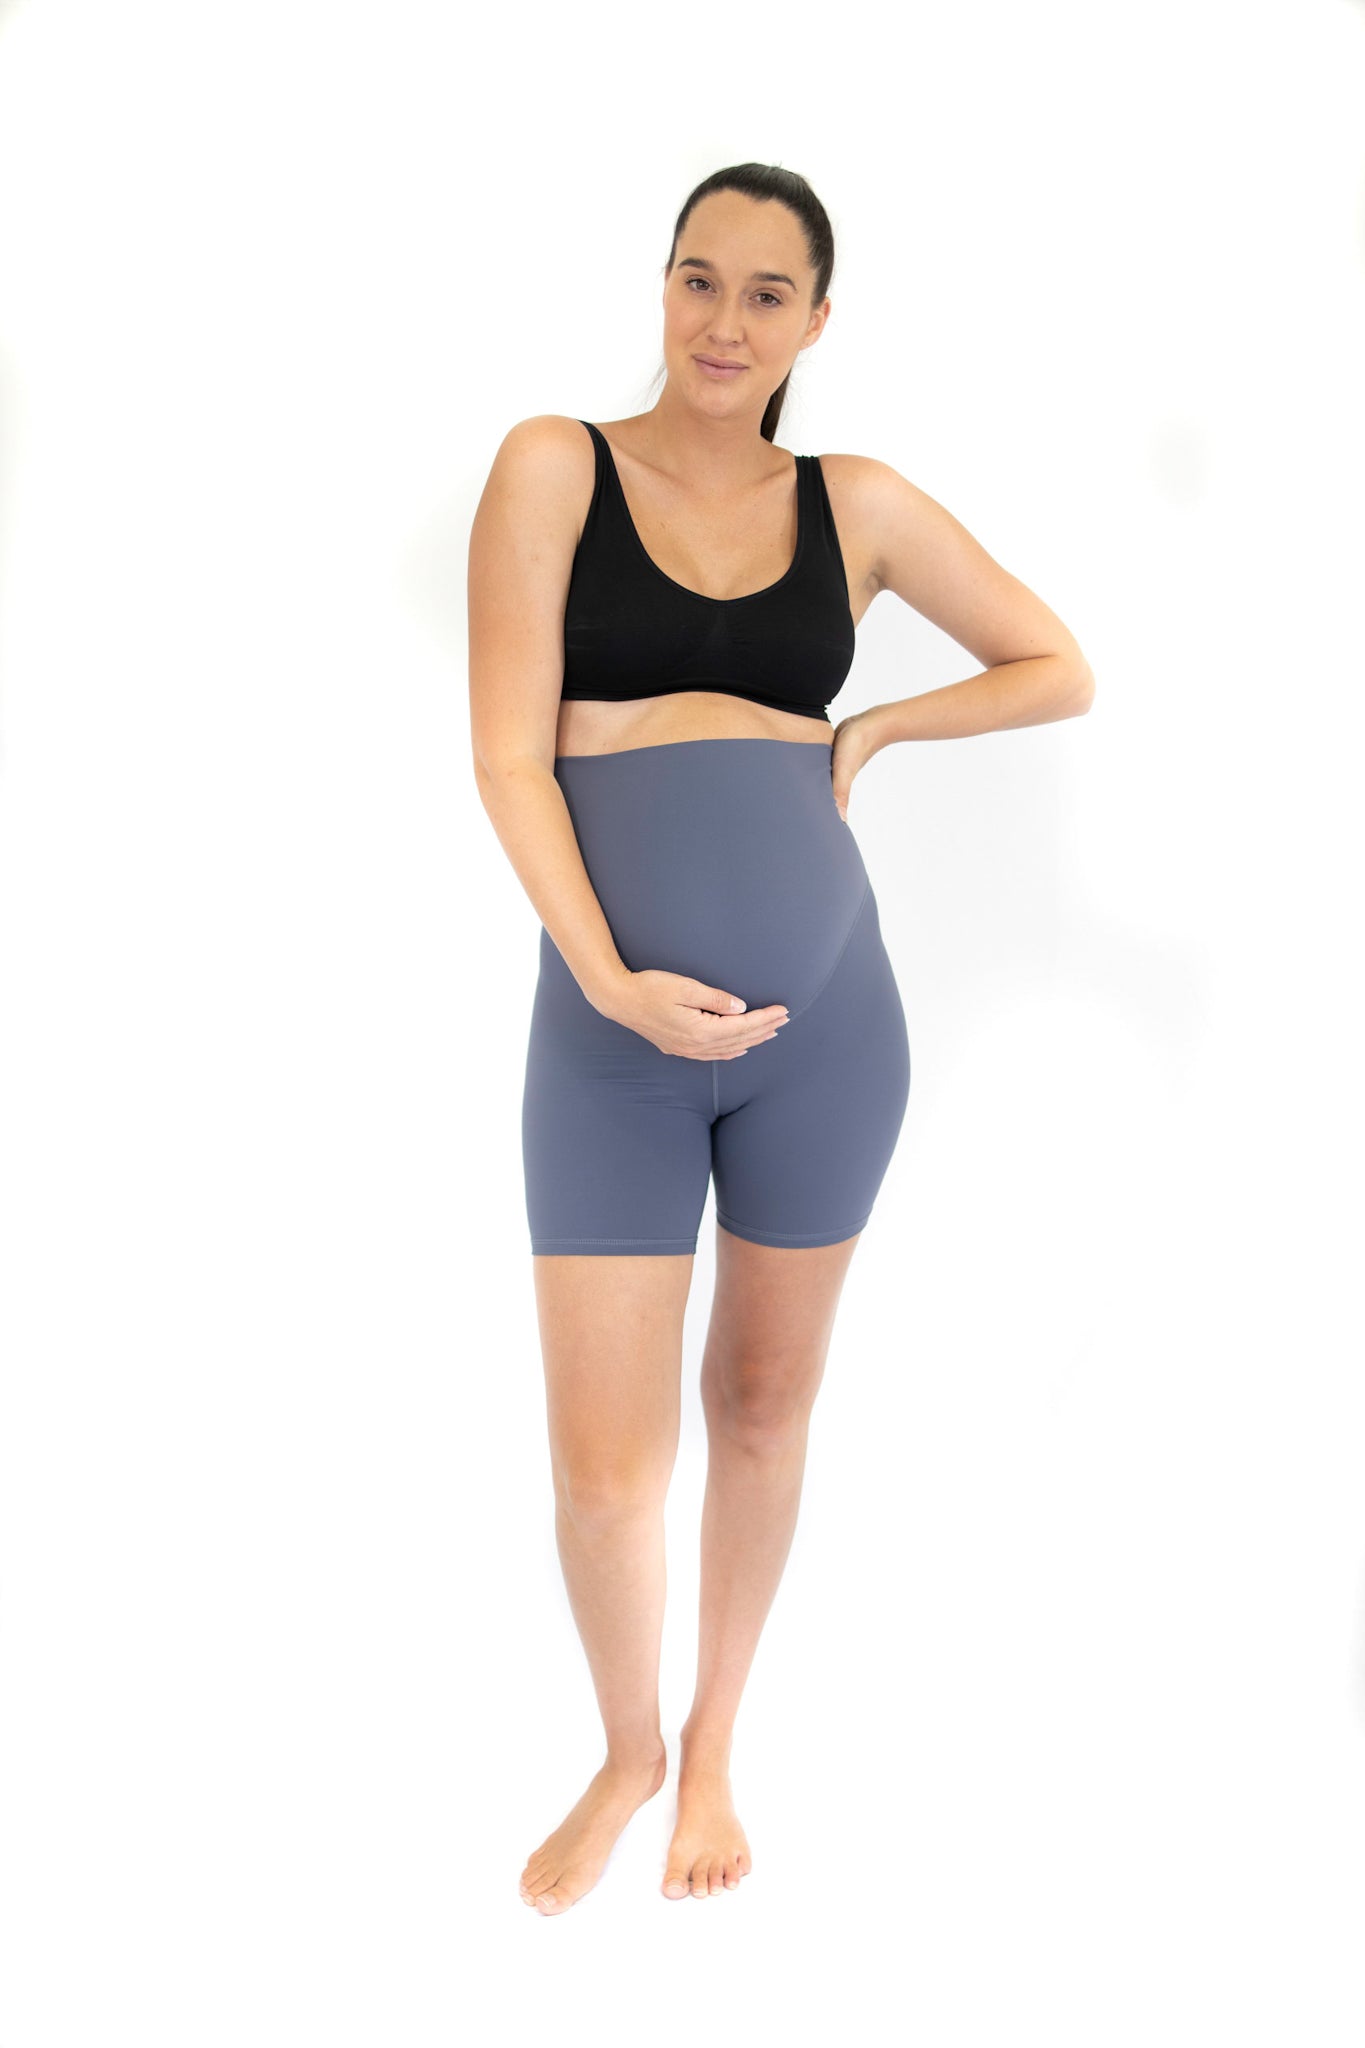 Maternity Spanx, Shop The Largest Collection